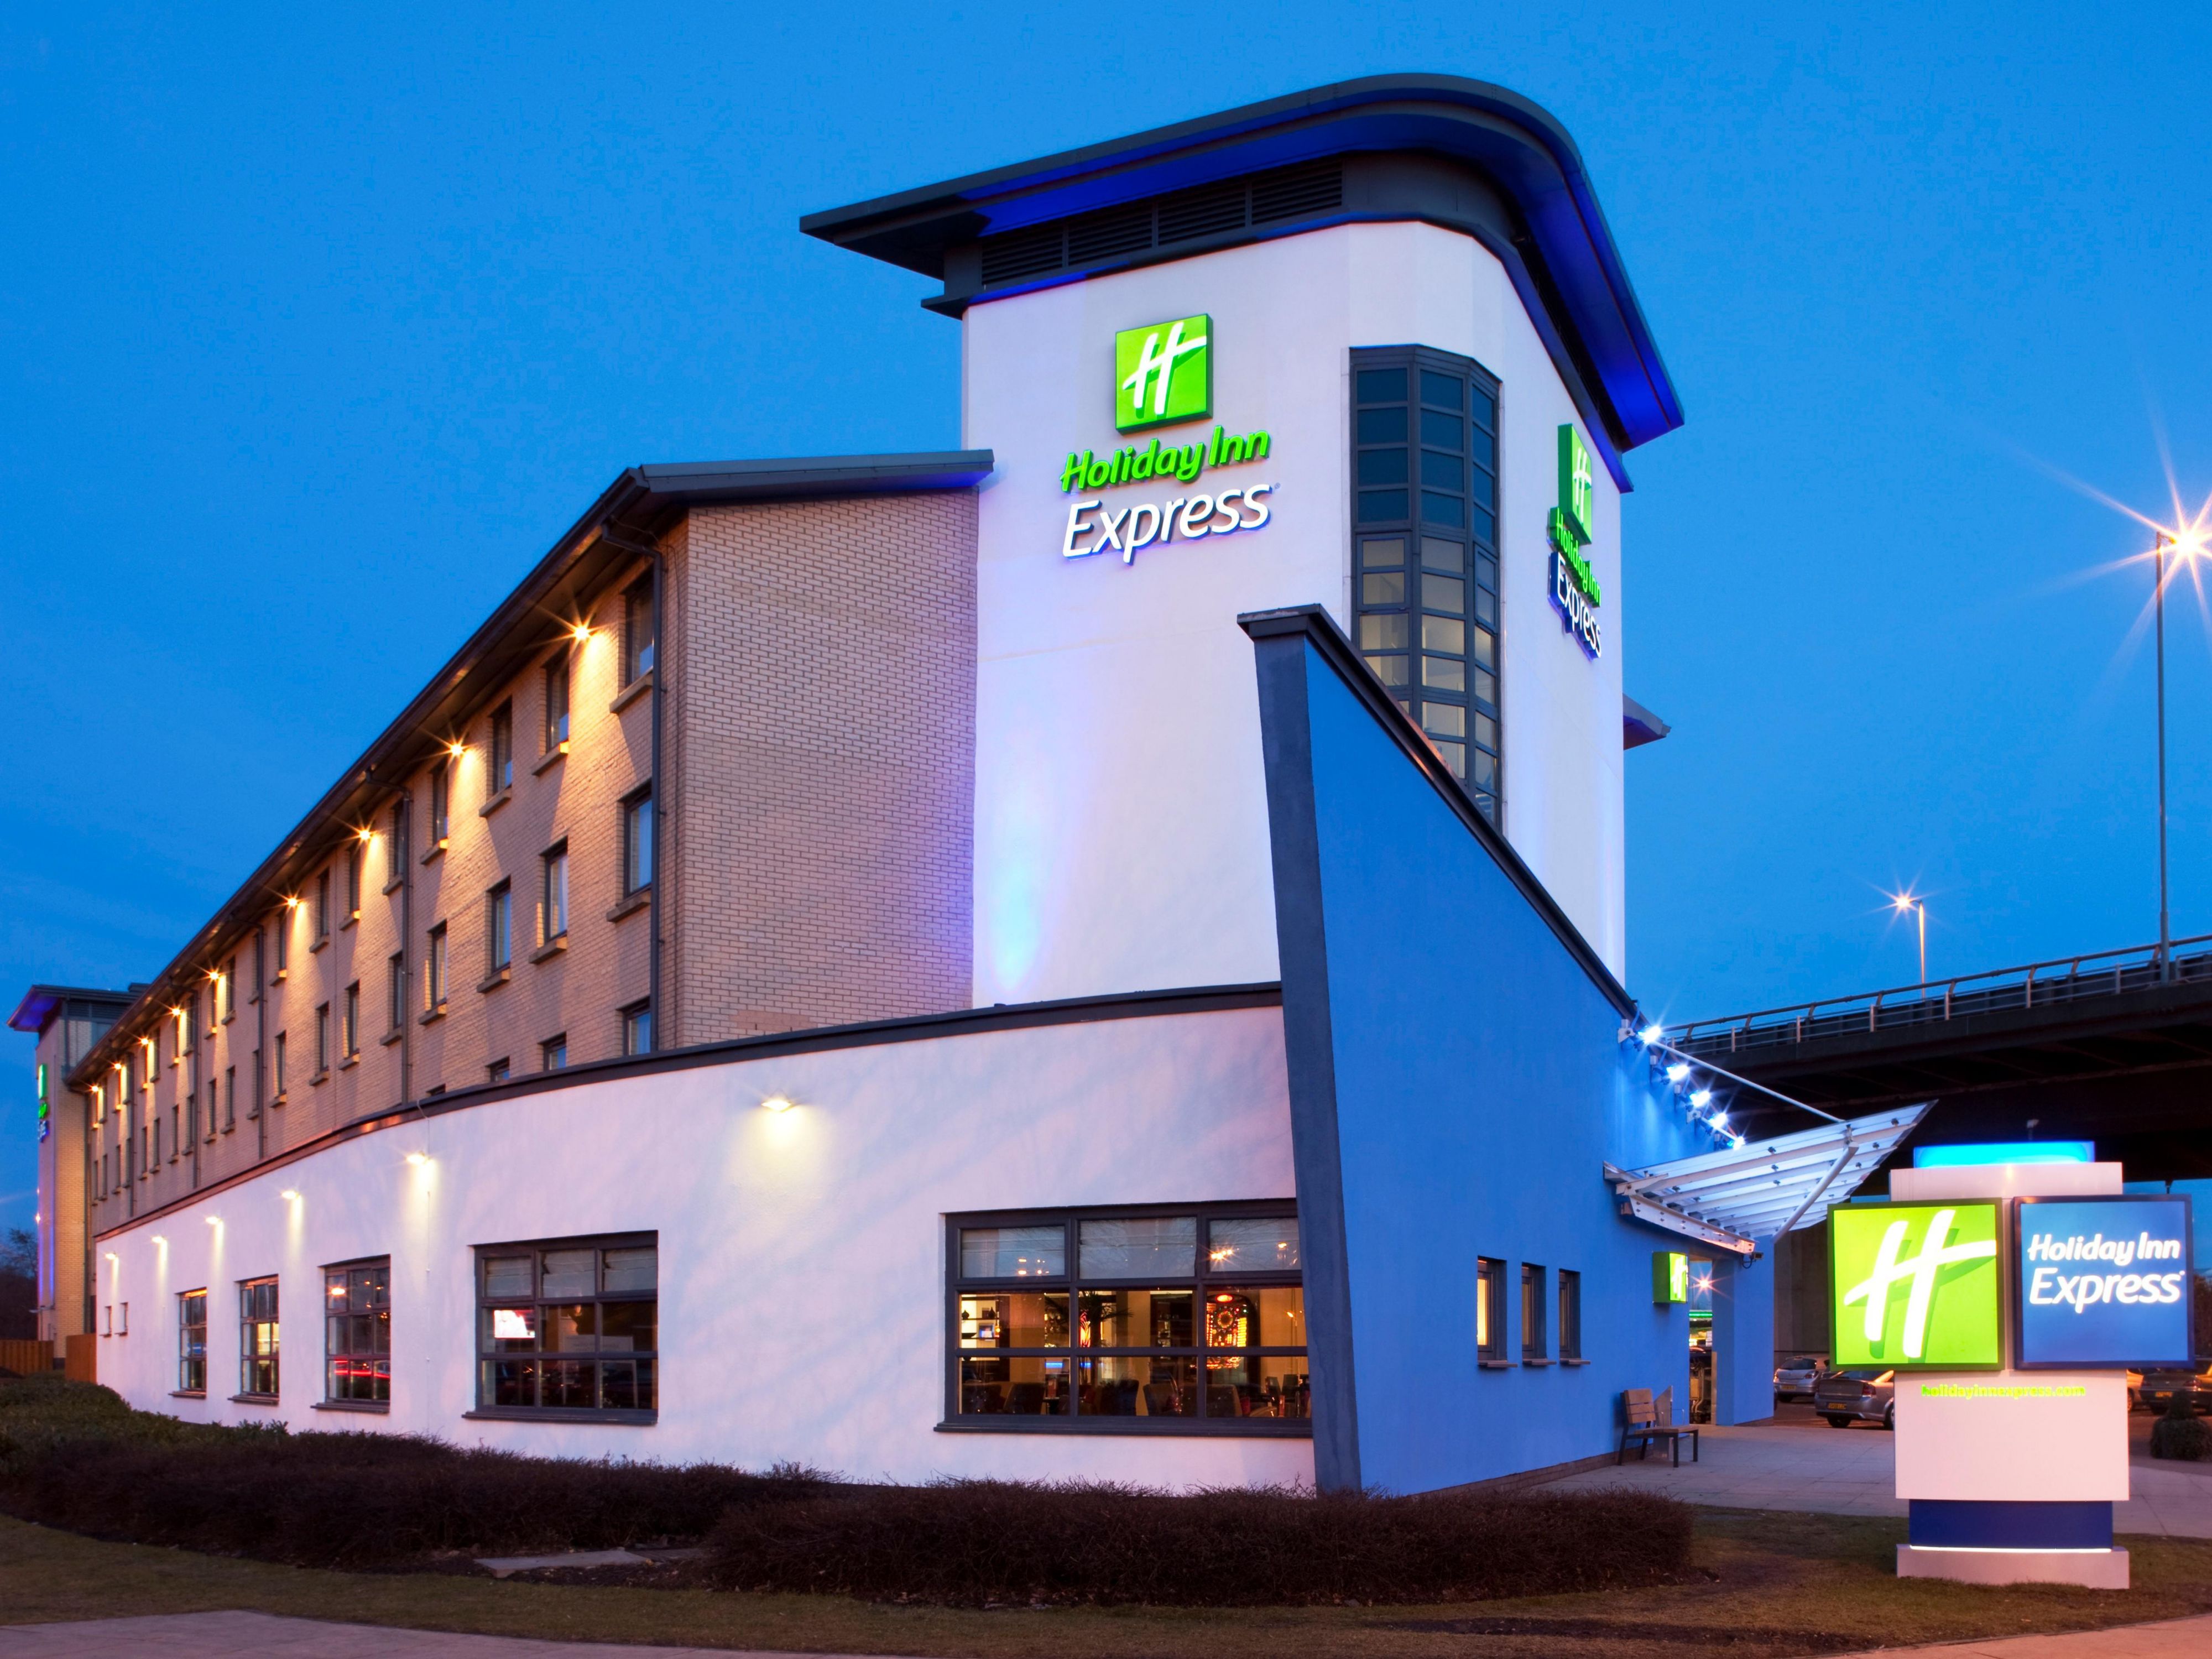 Airport Hotel: Holiday Inn Express Glasgow Airport